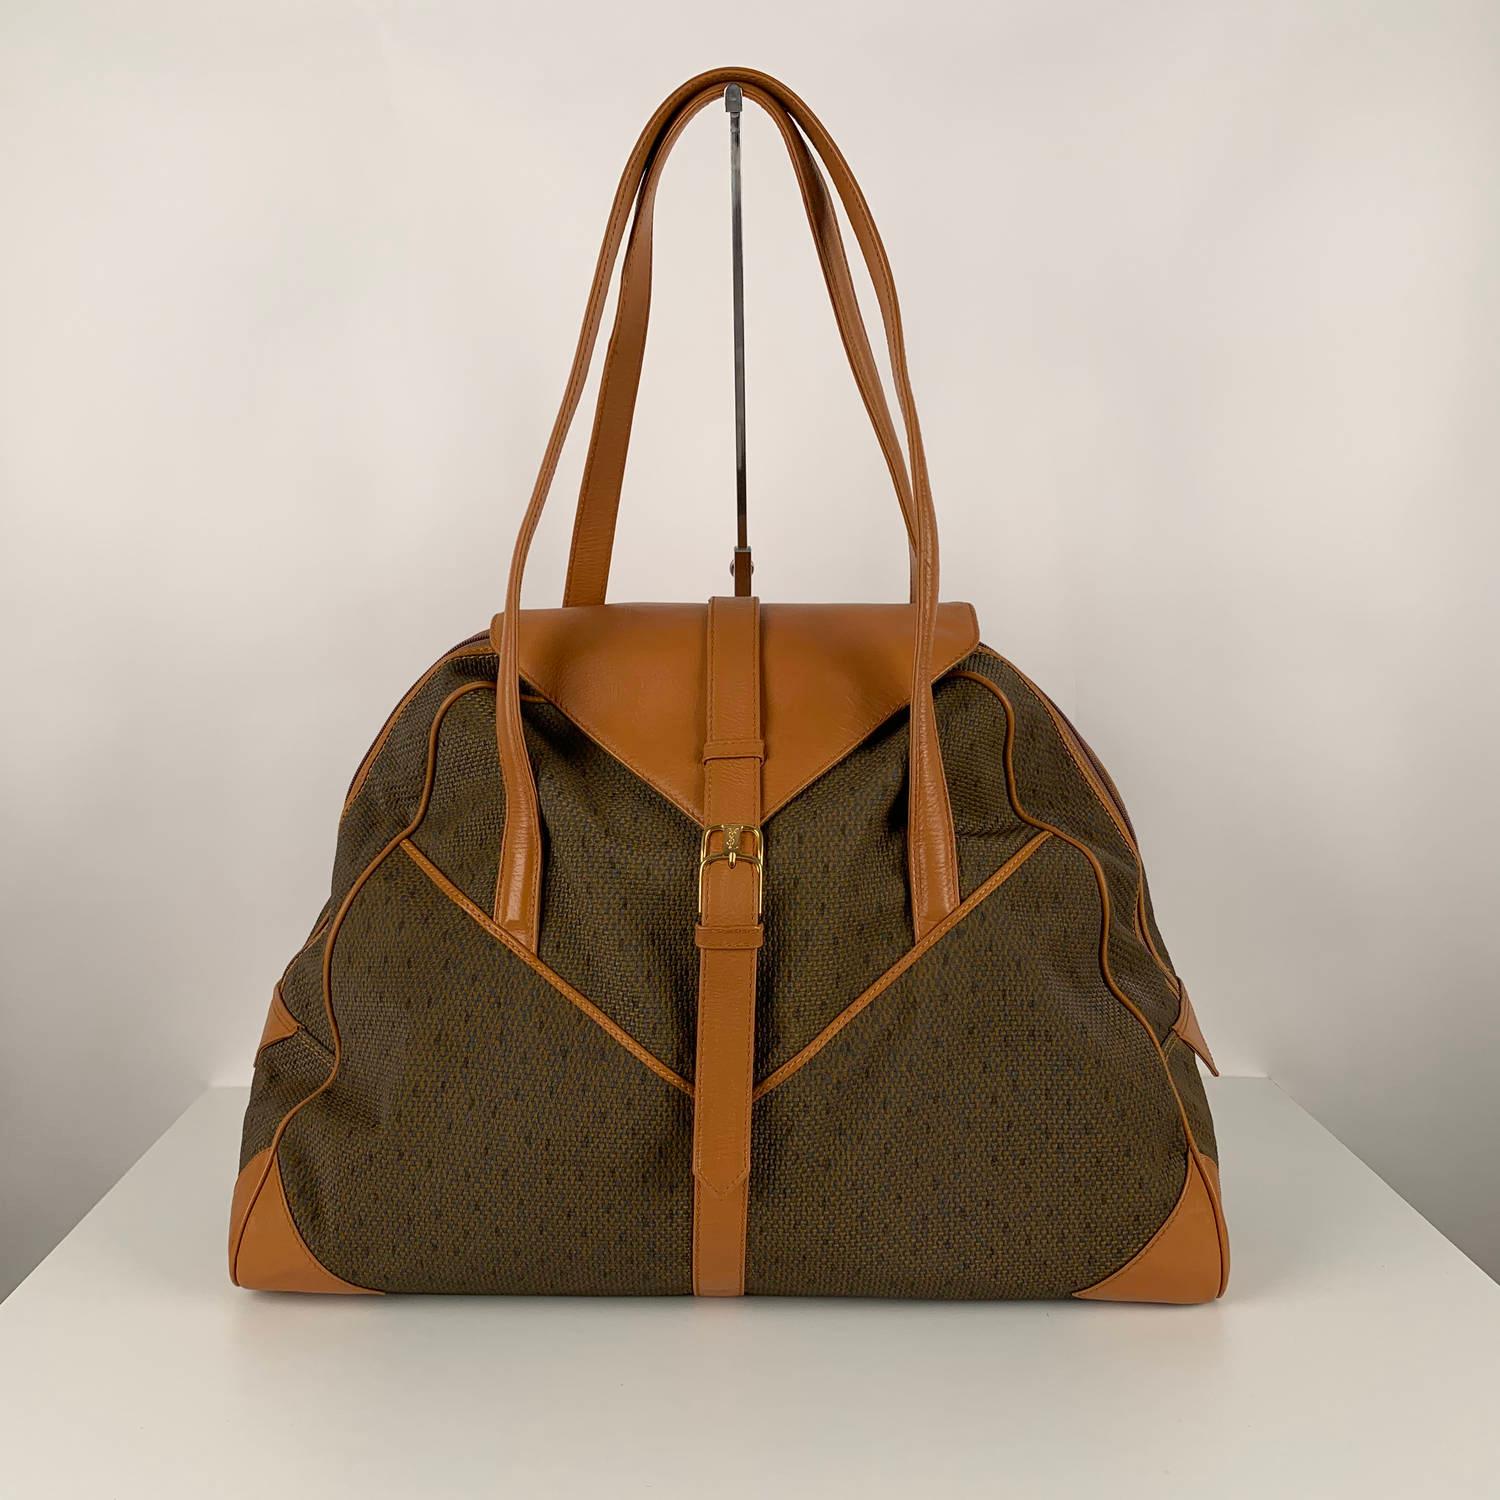 Yves Saint Laurent Vintage Tan Textured Canvas Travel Bag

Material : Canvas
Color : Tan 
Model : Weekender
Gender : Women
Country of Manufacture : France
Size : Large
Bag Depth : 8,5 inches - 21,6 cm 
Bag Height : 13 inches - 33 cm 
Bag Length : 20